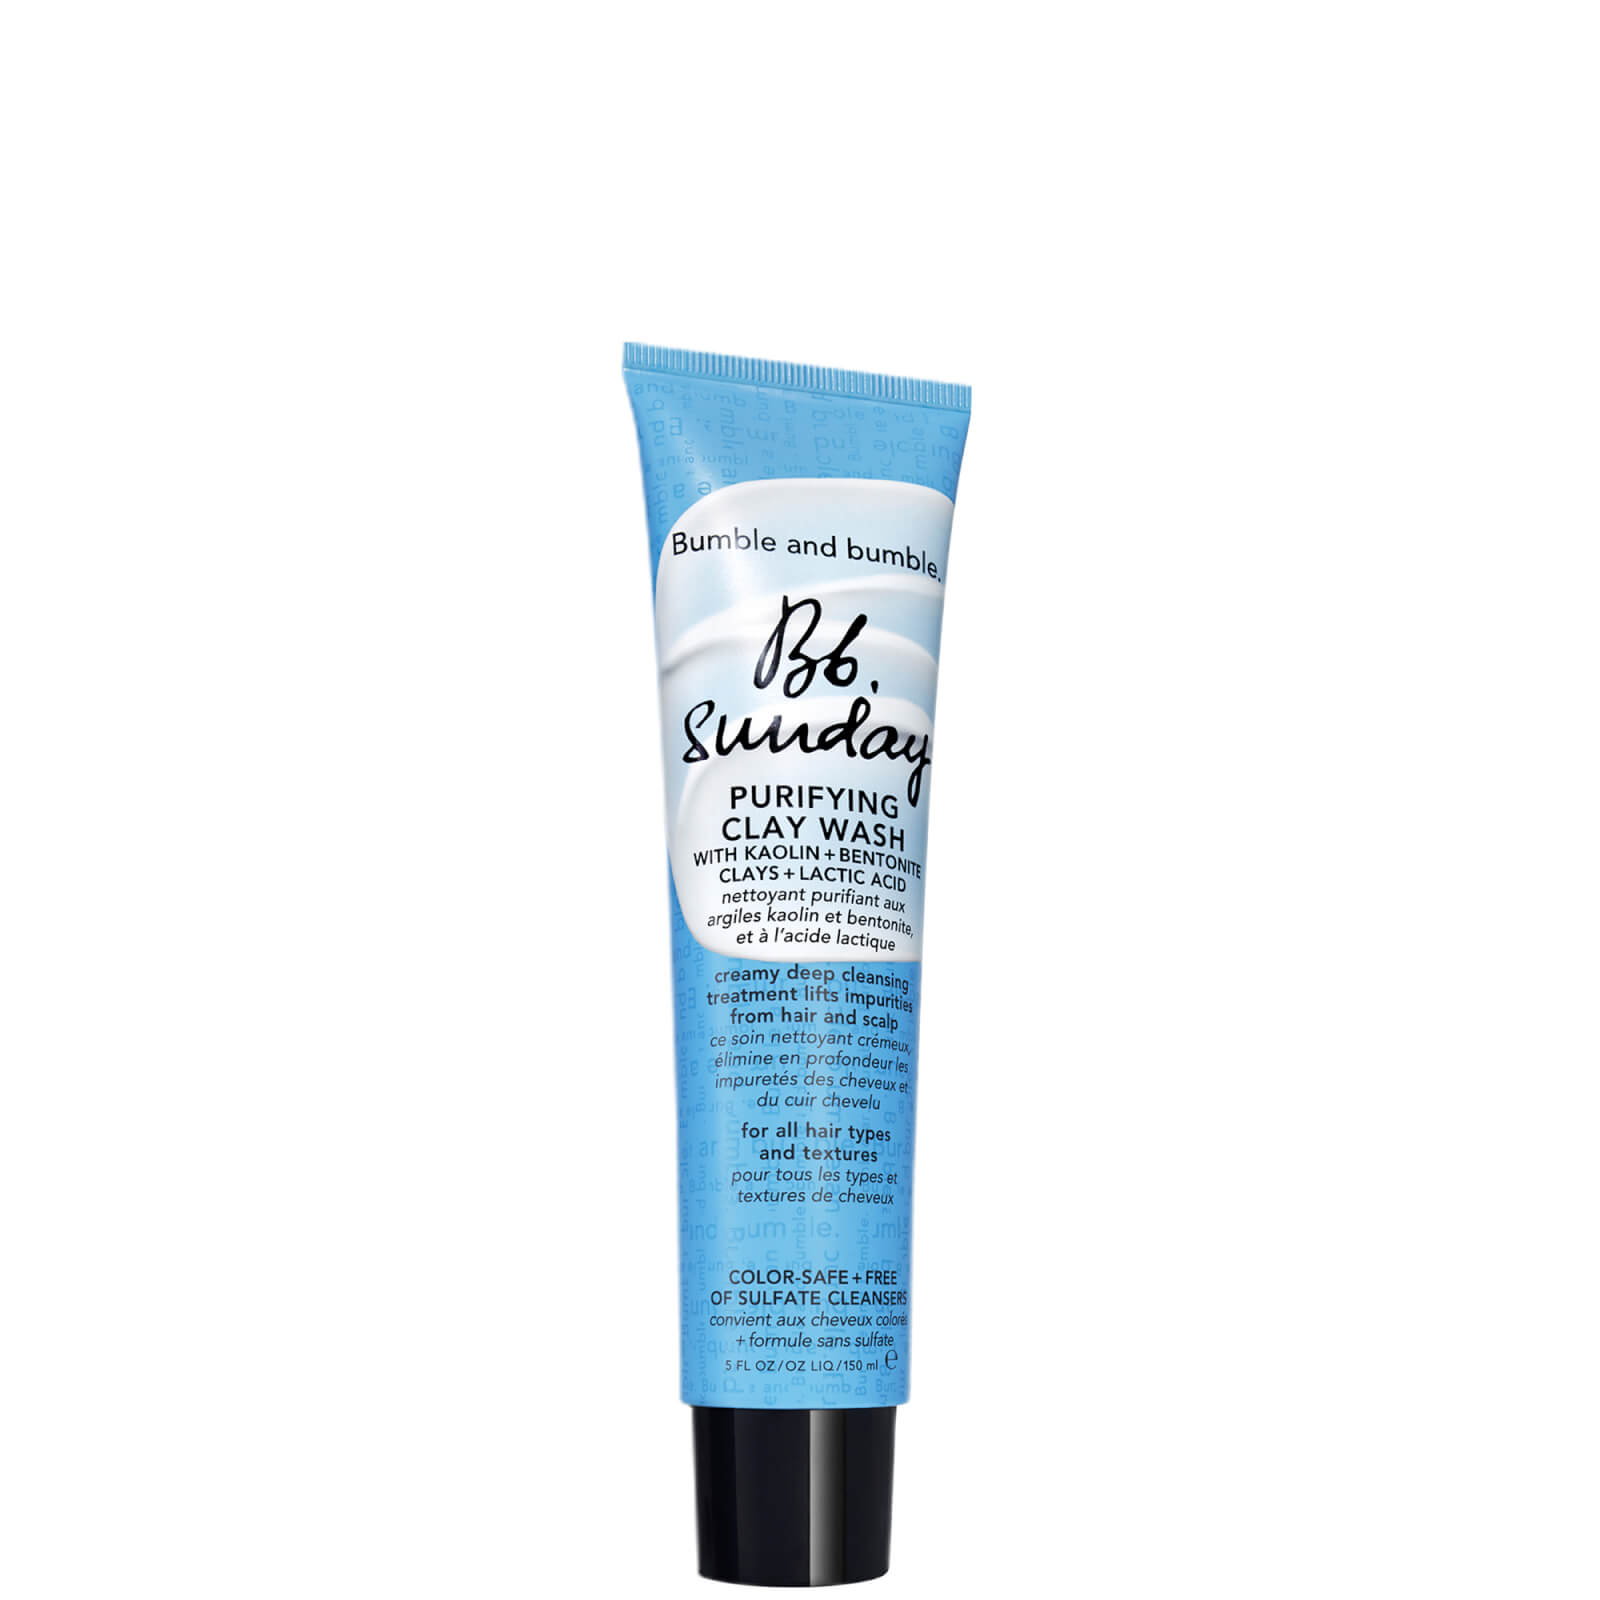 Image of Bumble and bumble Sunday Purifying Clay Wash Full Size 15ml